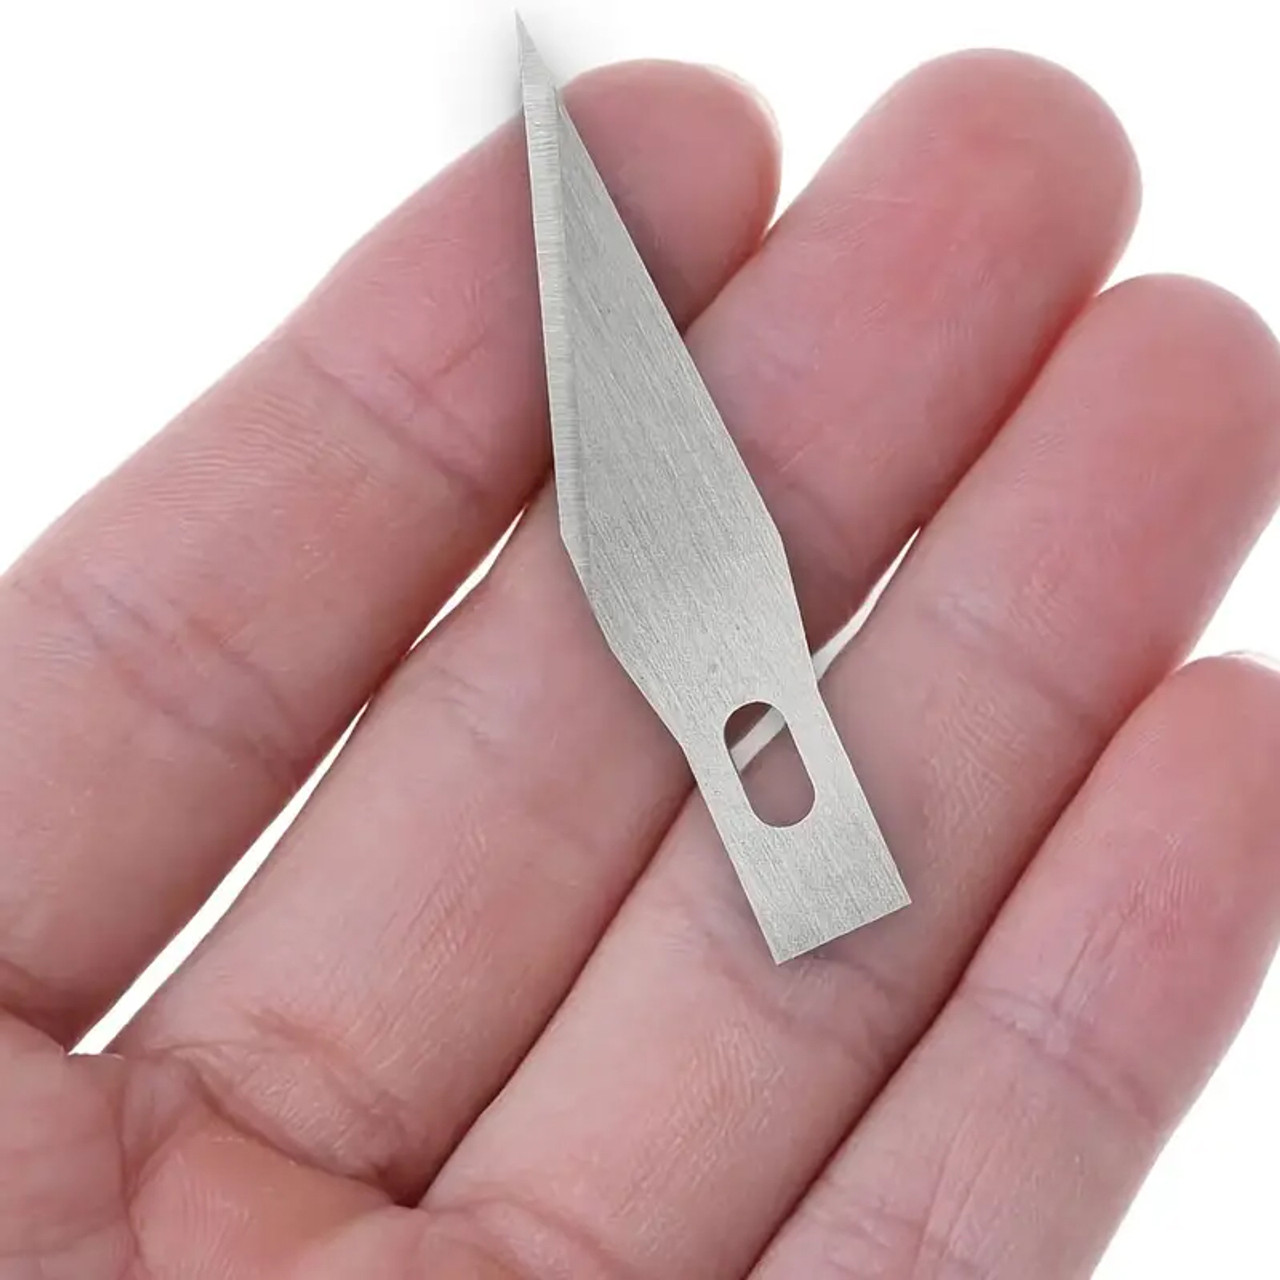 Exacto No. #10 Gen Purp Hobby Knife Blades Refill Replacement Crafts Art